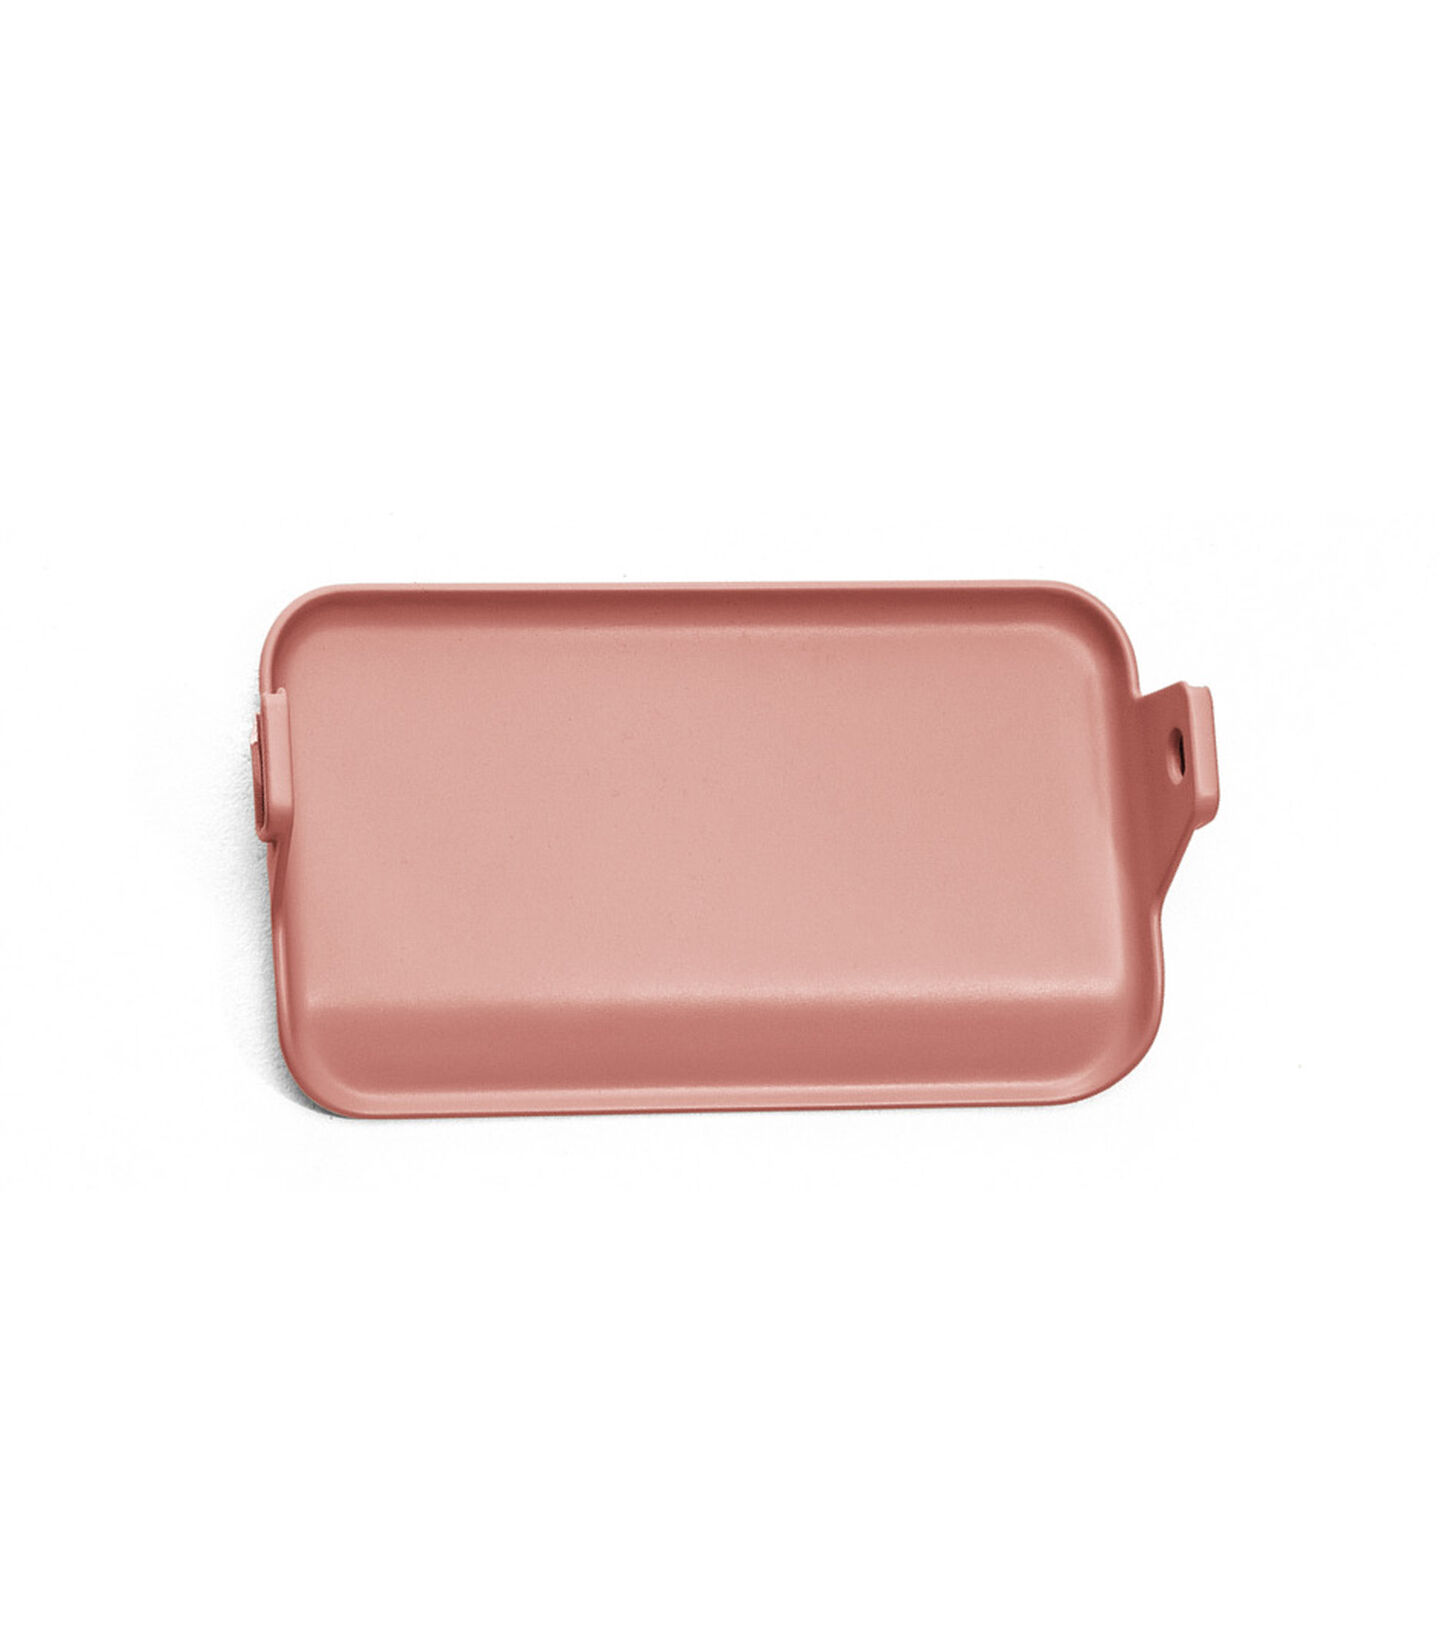 Stokke® Clikk™ Foot Plate in Sunny Coral. Available as Spare part. view 1